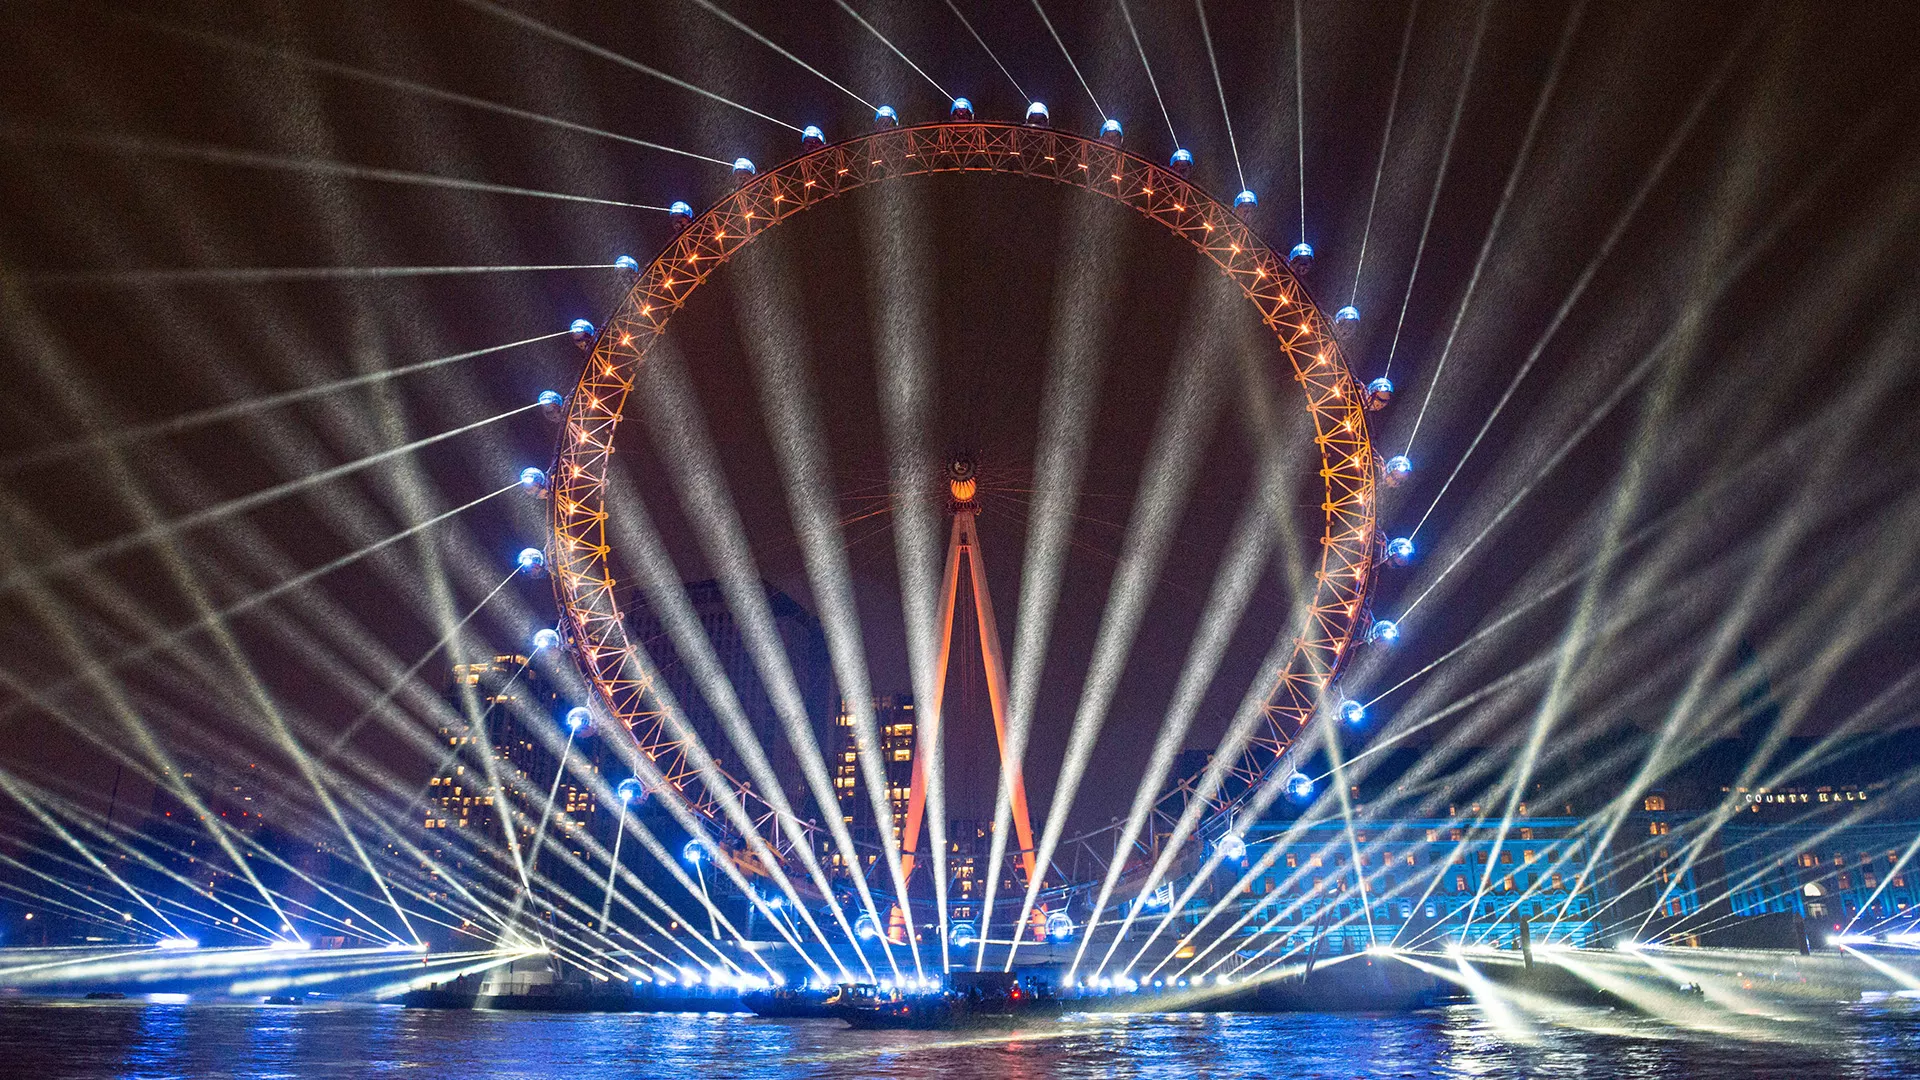 Laser lights encircle the London Eye during New Years Eve festivities